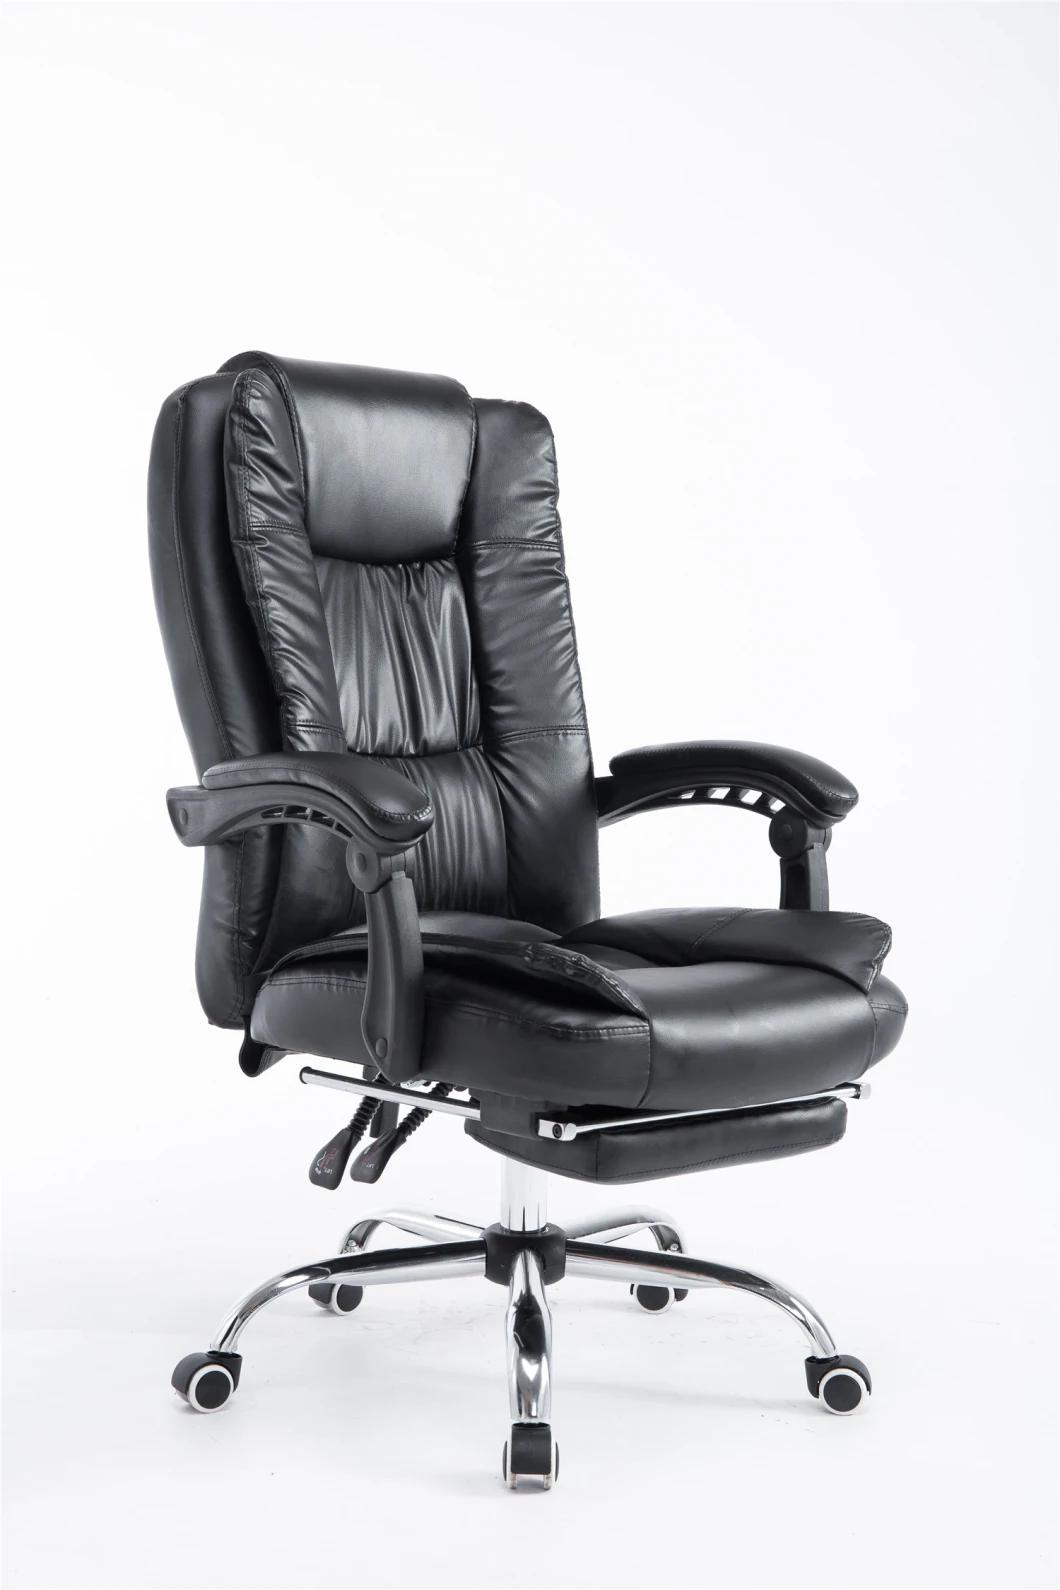 Ergonomic Office Manager Computer Task Conference Leather Racing Gaming Chair